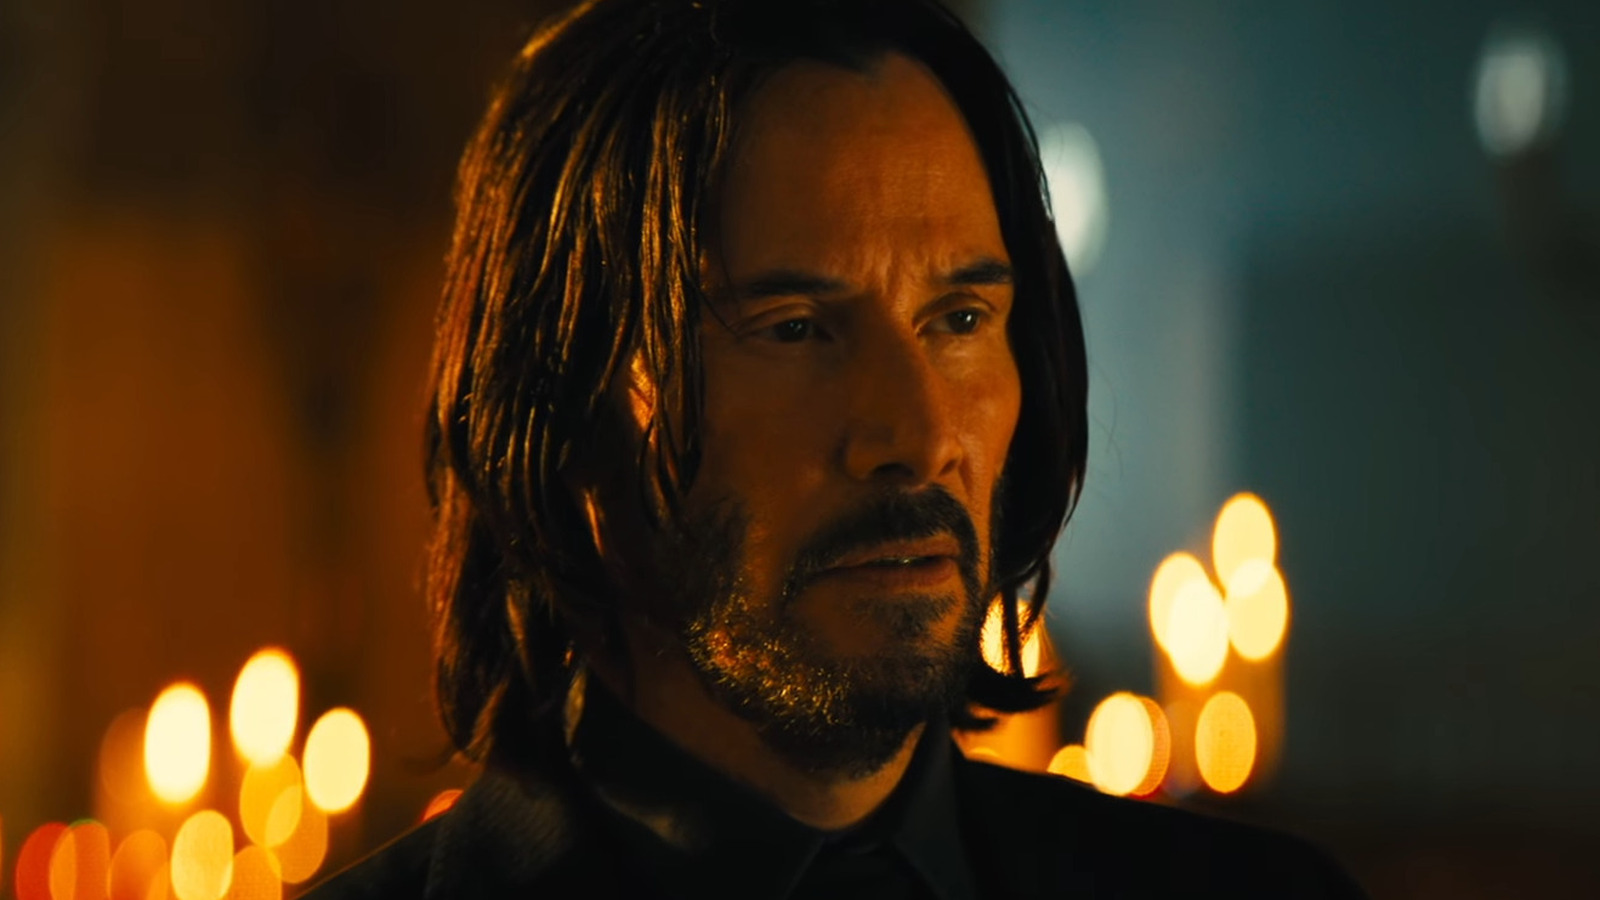 John Wick 5: Lionsgate officially announces that the film is in development